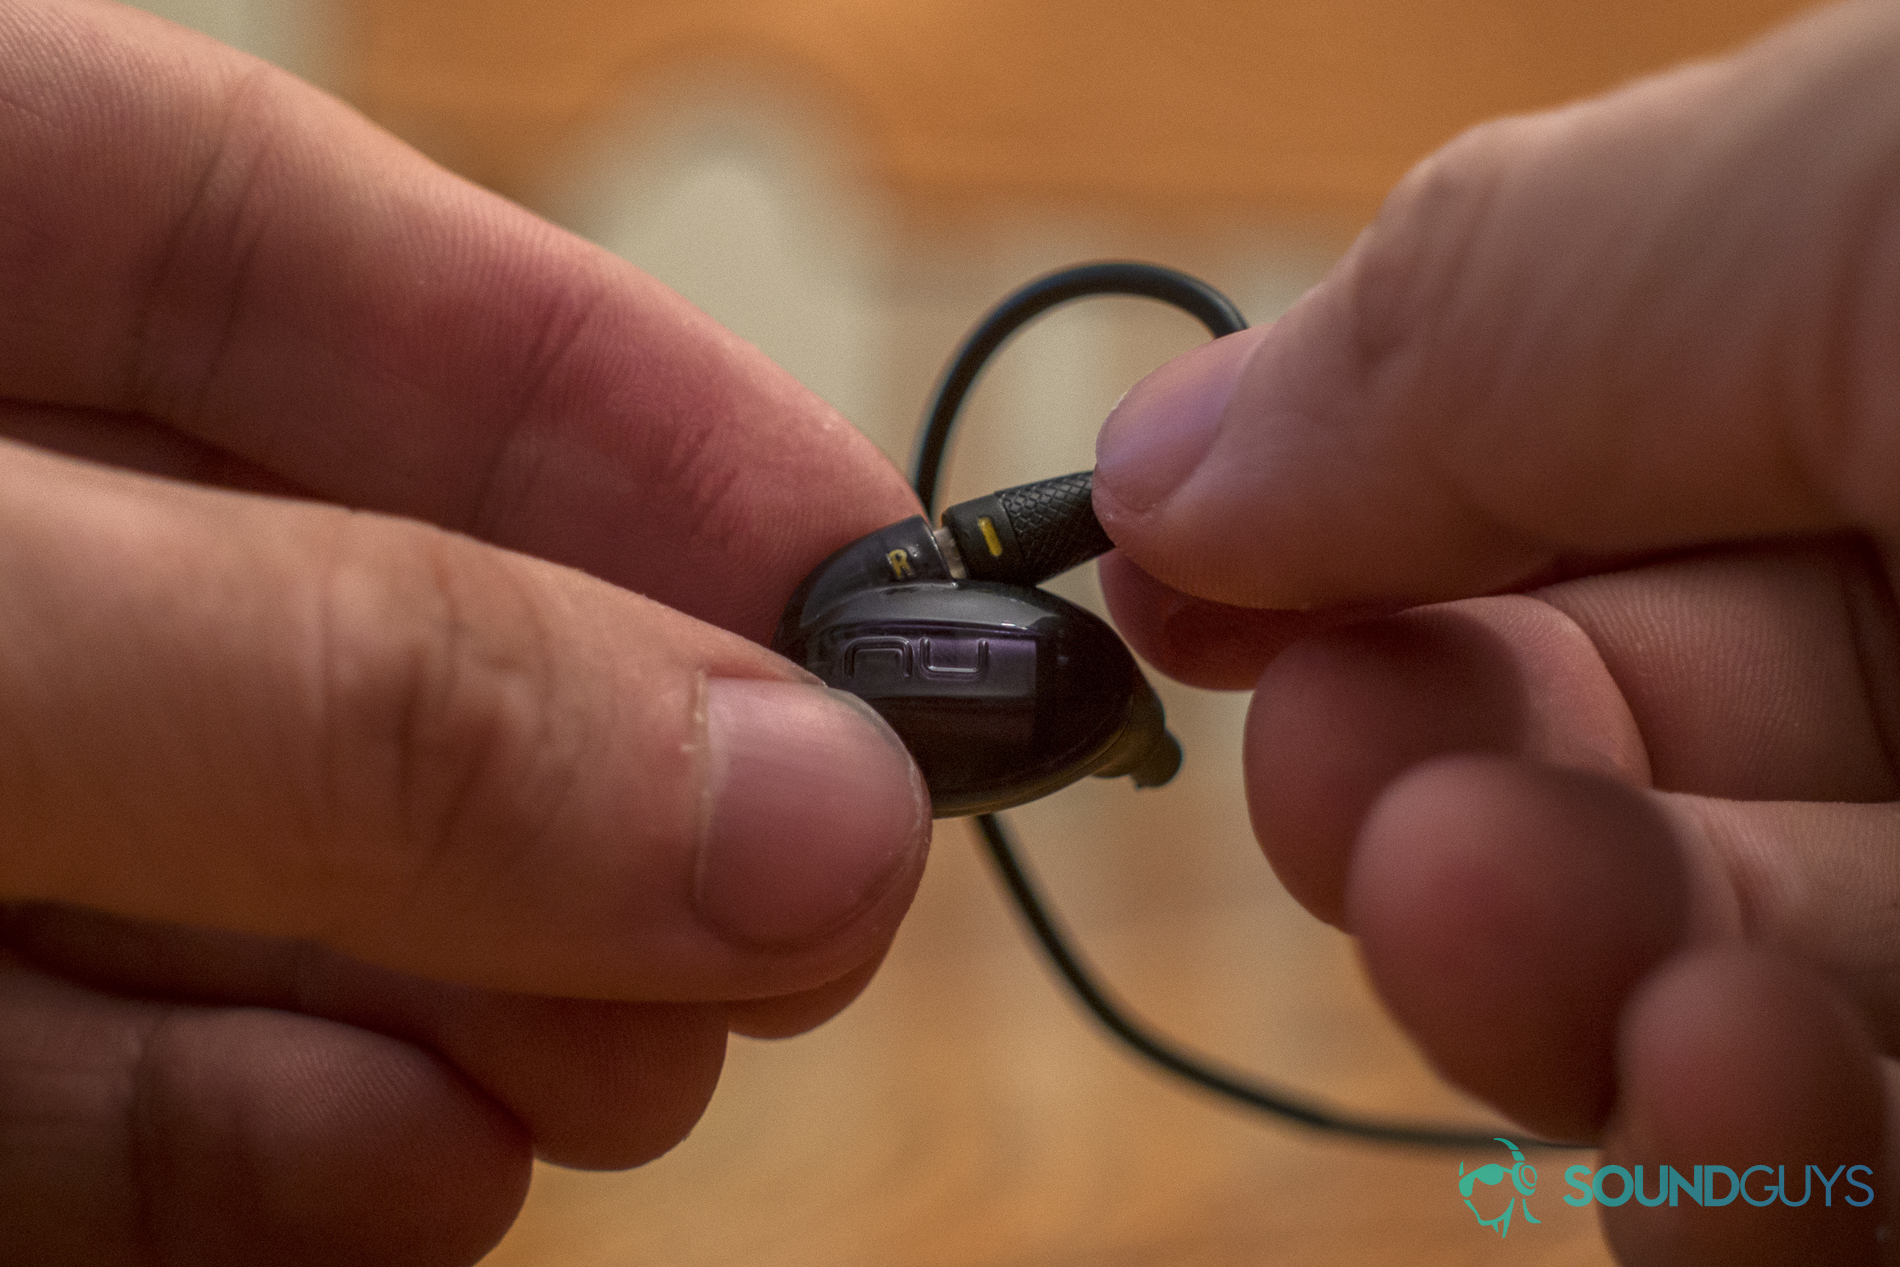 A photo demonstrating the NuForce x Massdrop EDC In-ear monitor with its cables being removed.